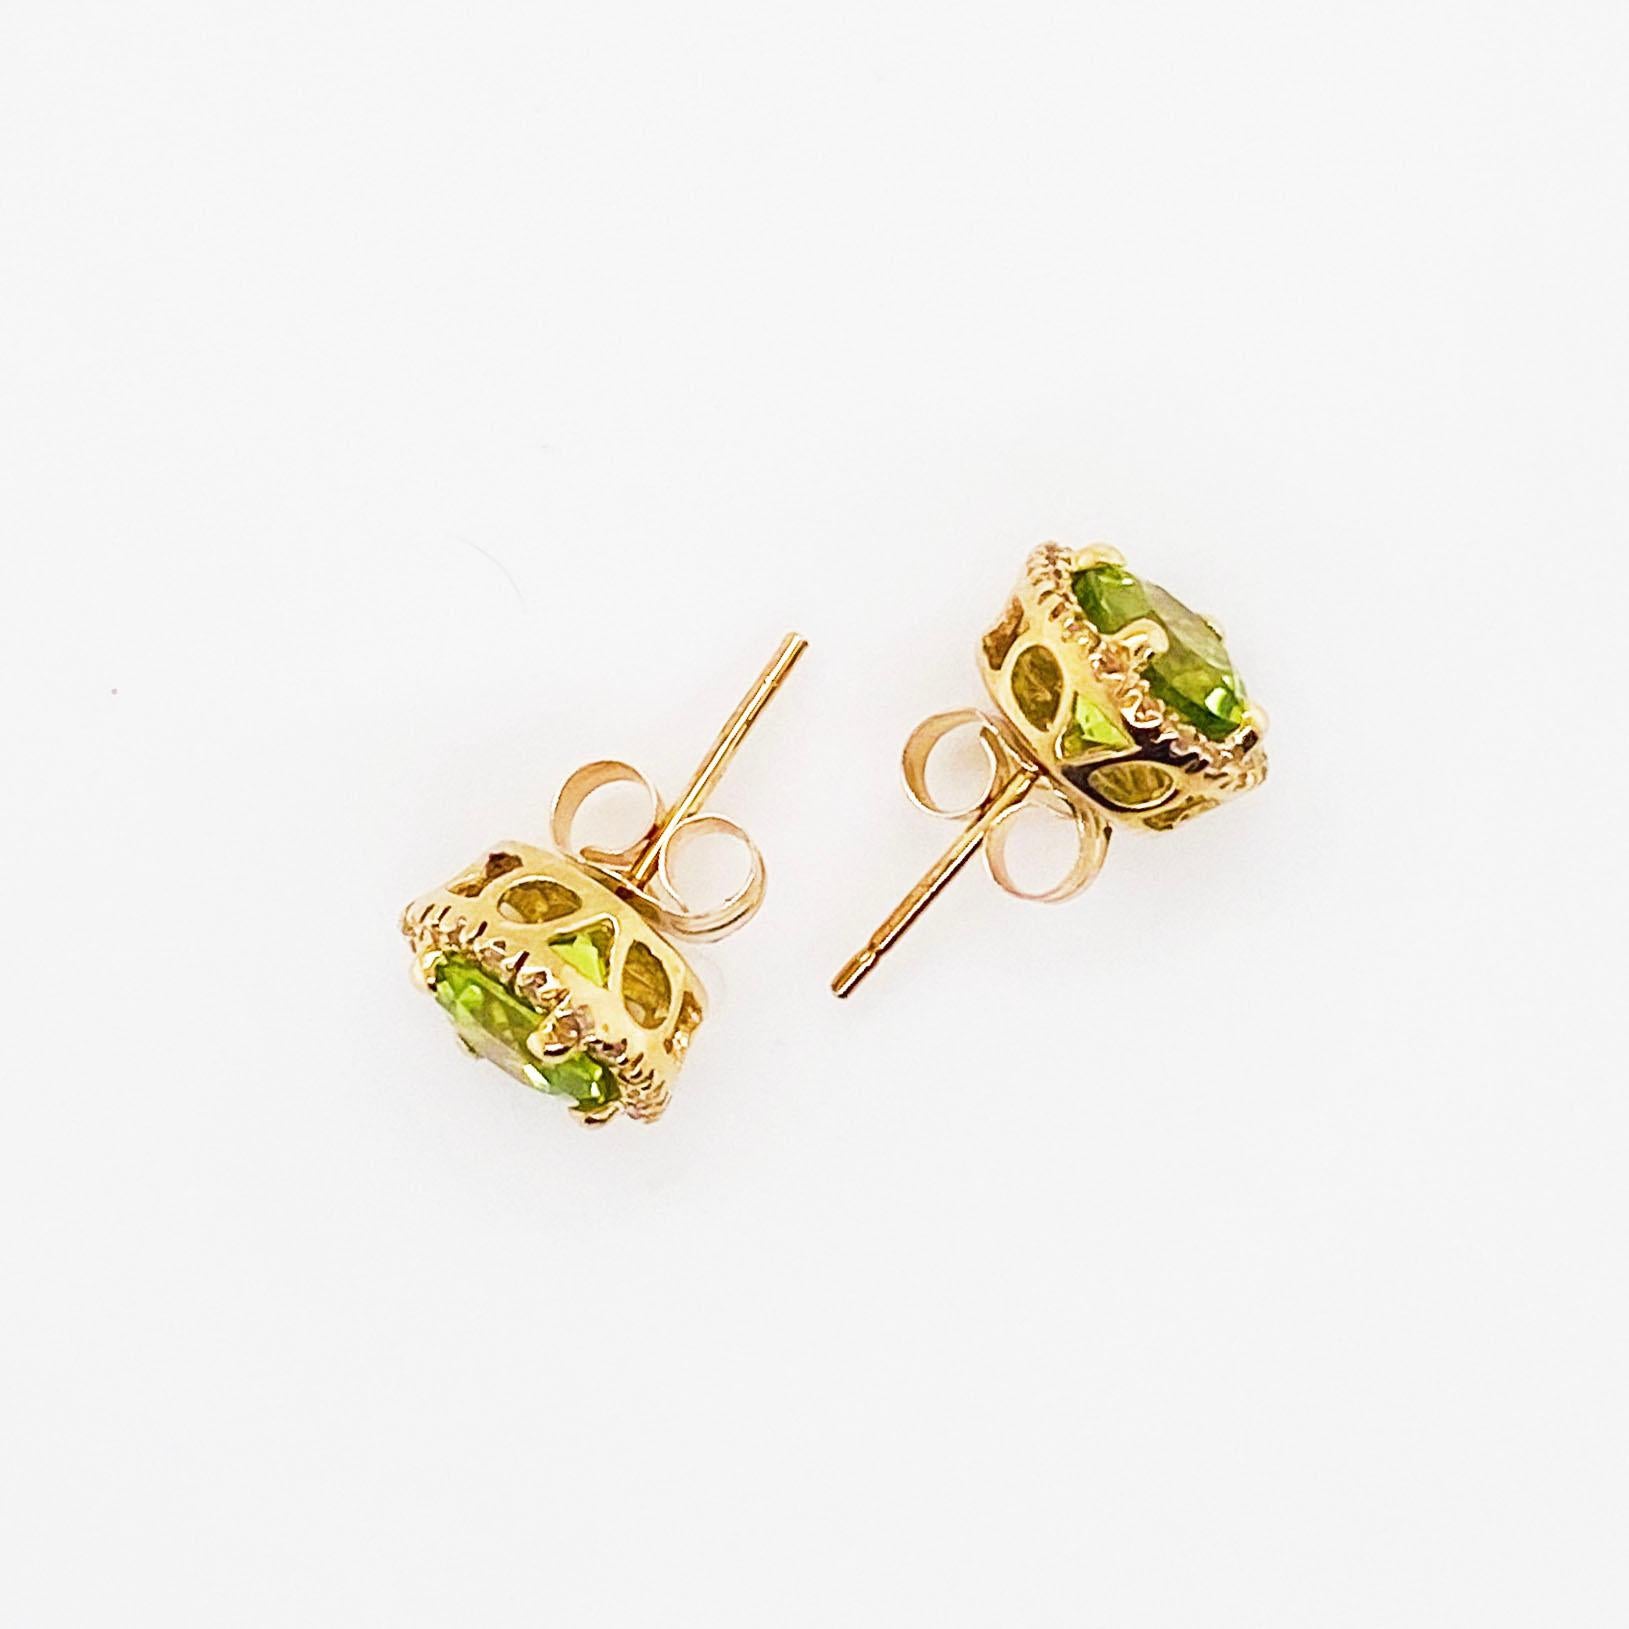 Contemporary Peridot & Topaz Earrings with White Topaz Halo Studs - 3 Carat Total Weight